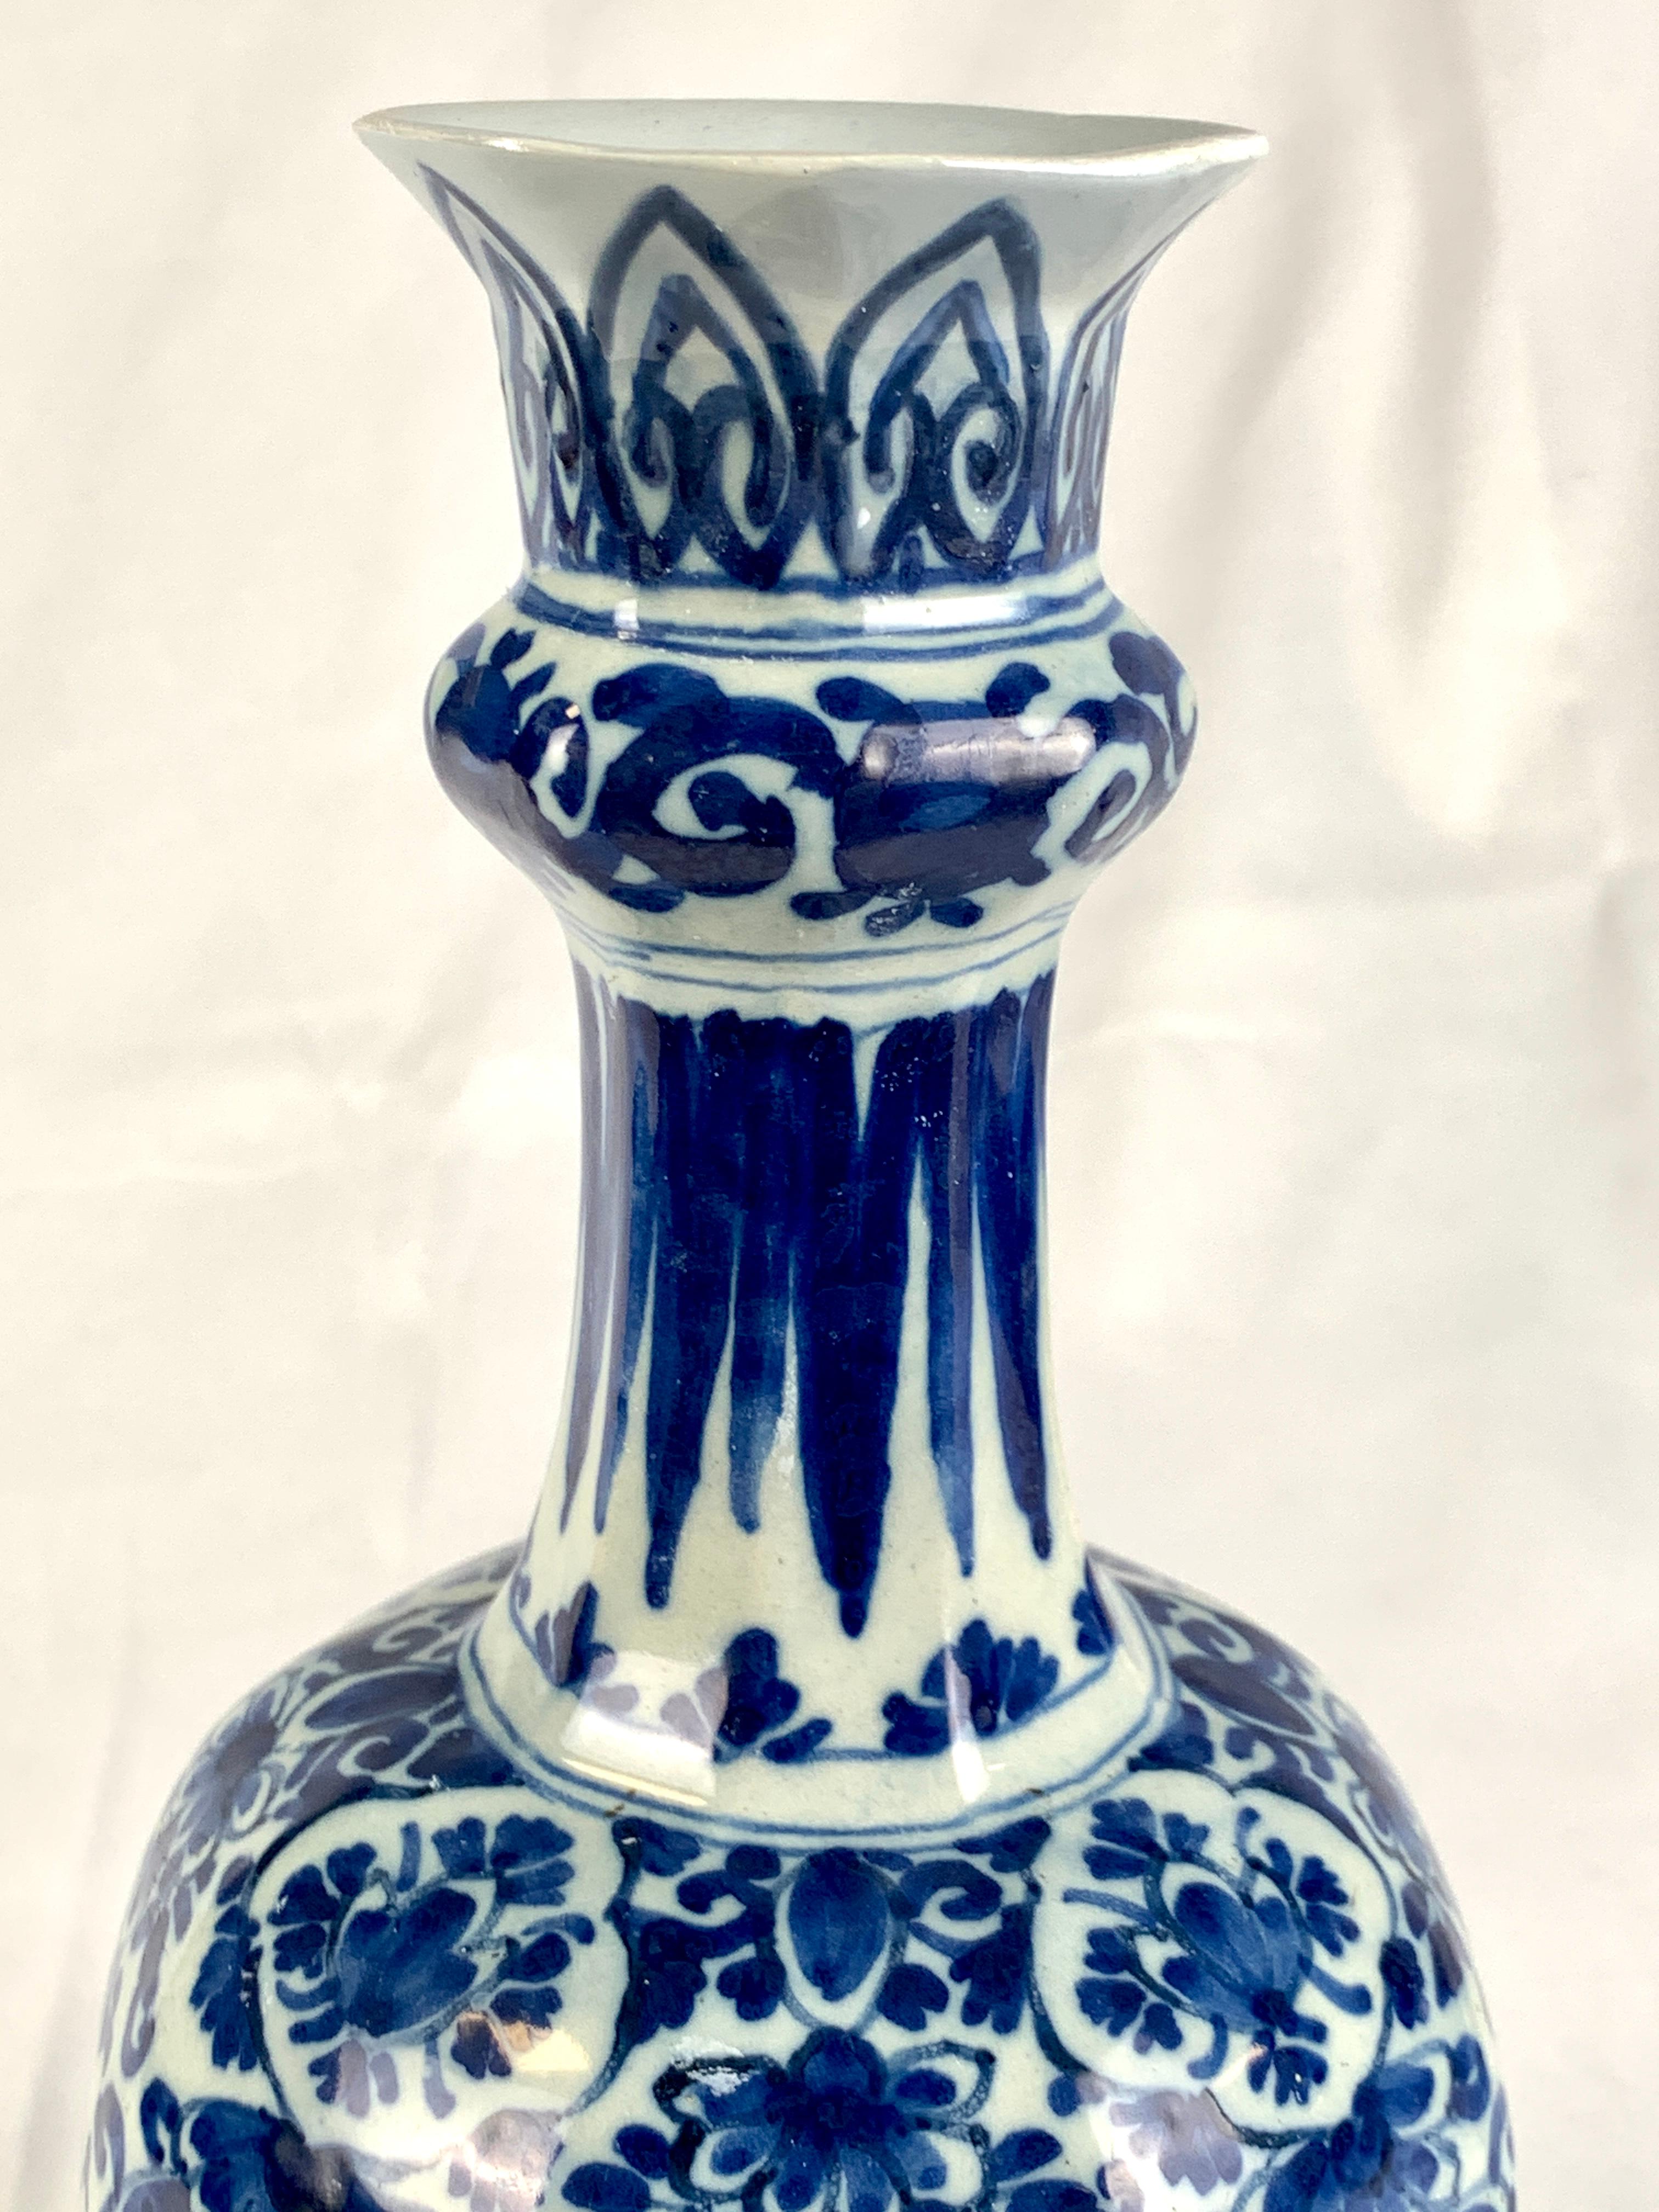 Dutch Delft Blue and White Vase Hand Painted 18th Century circa 1780 Netherlands For Sale